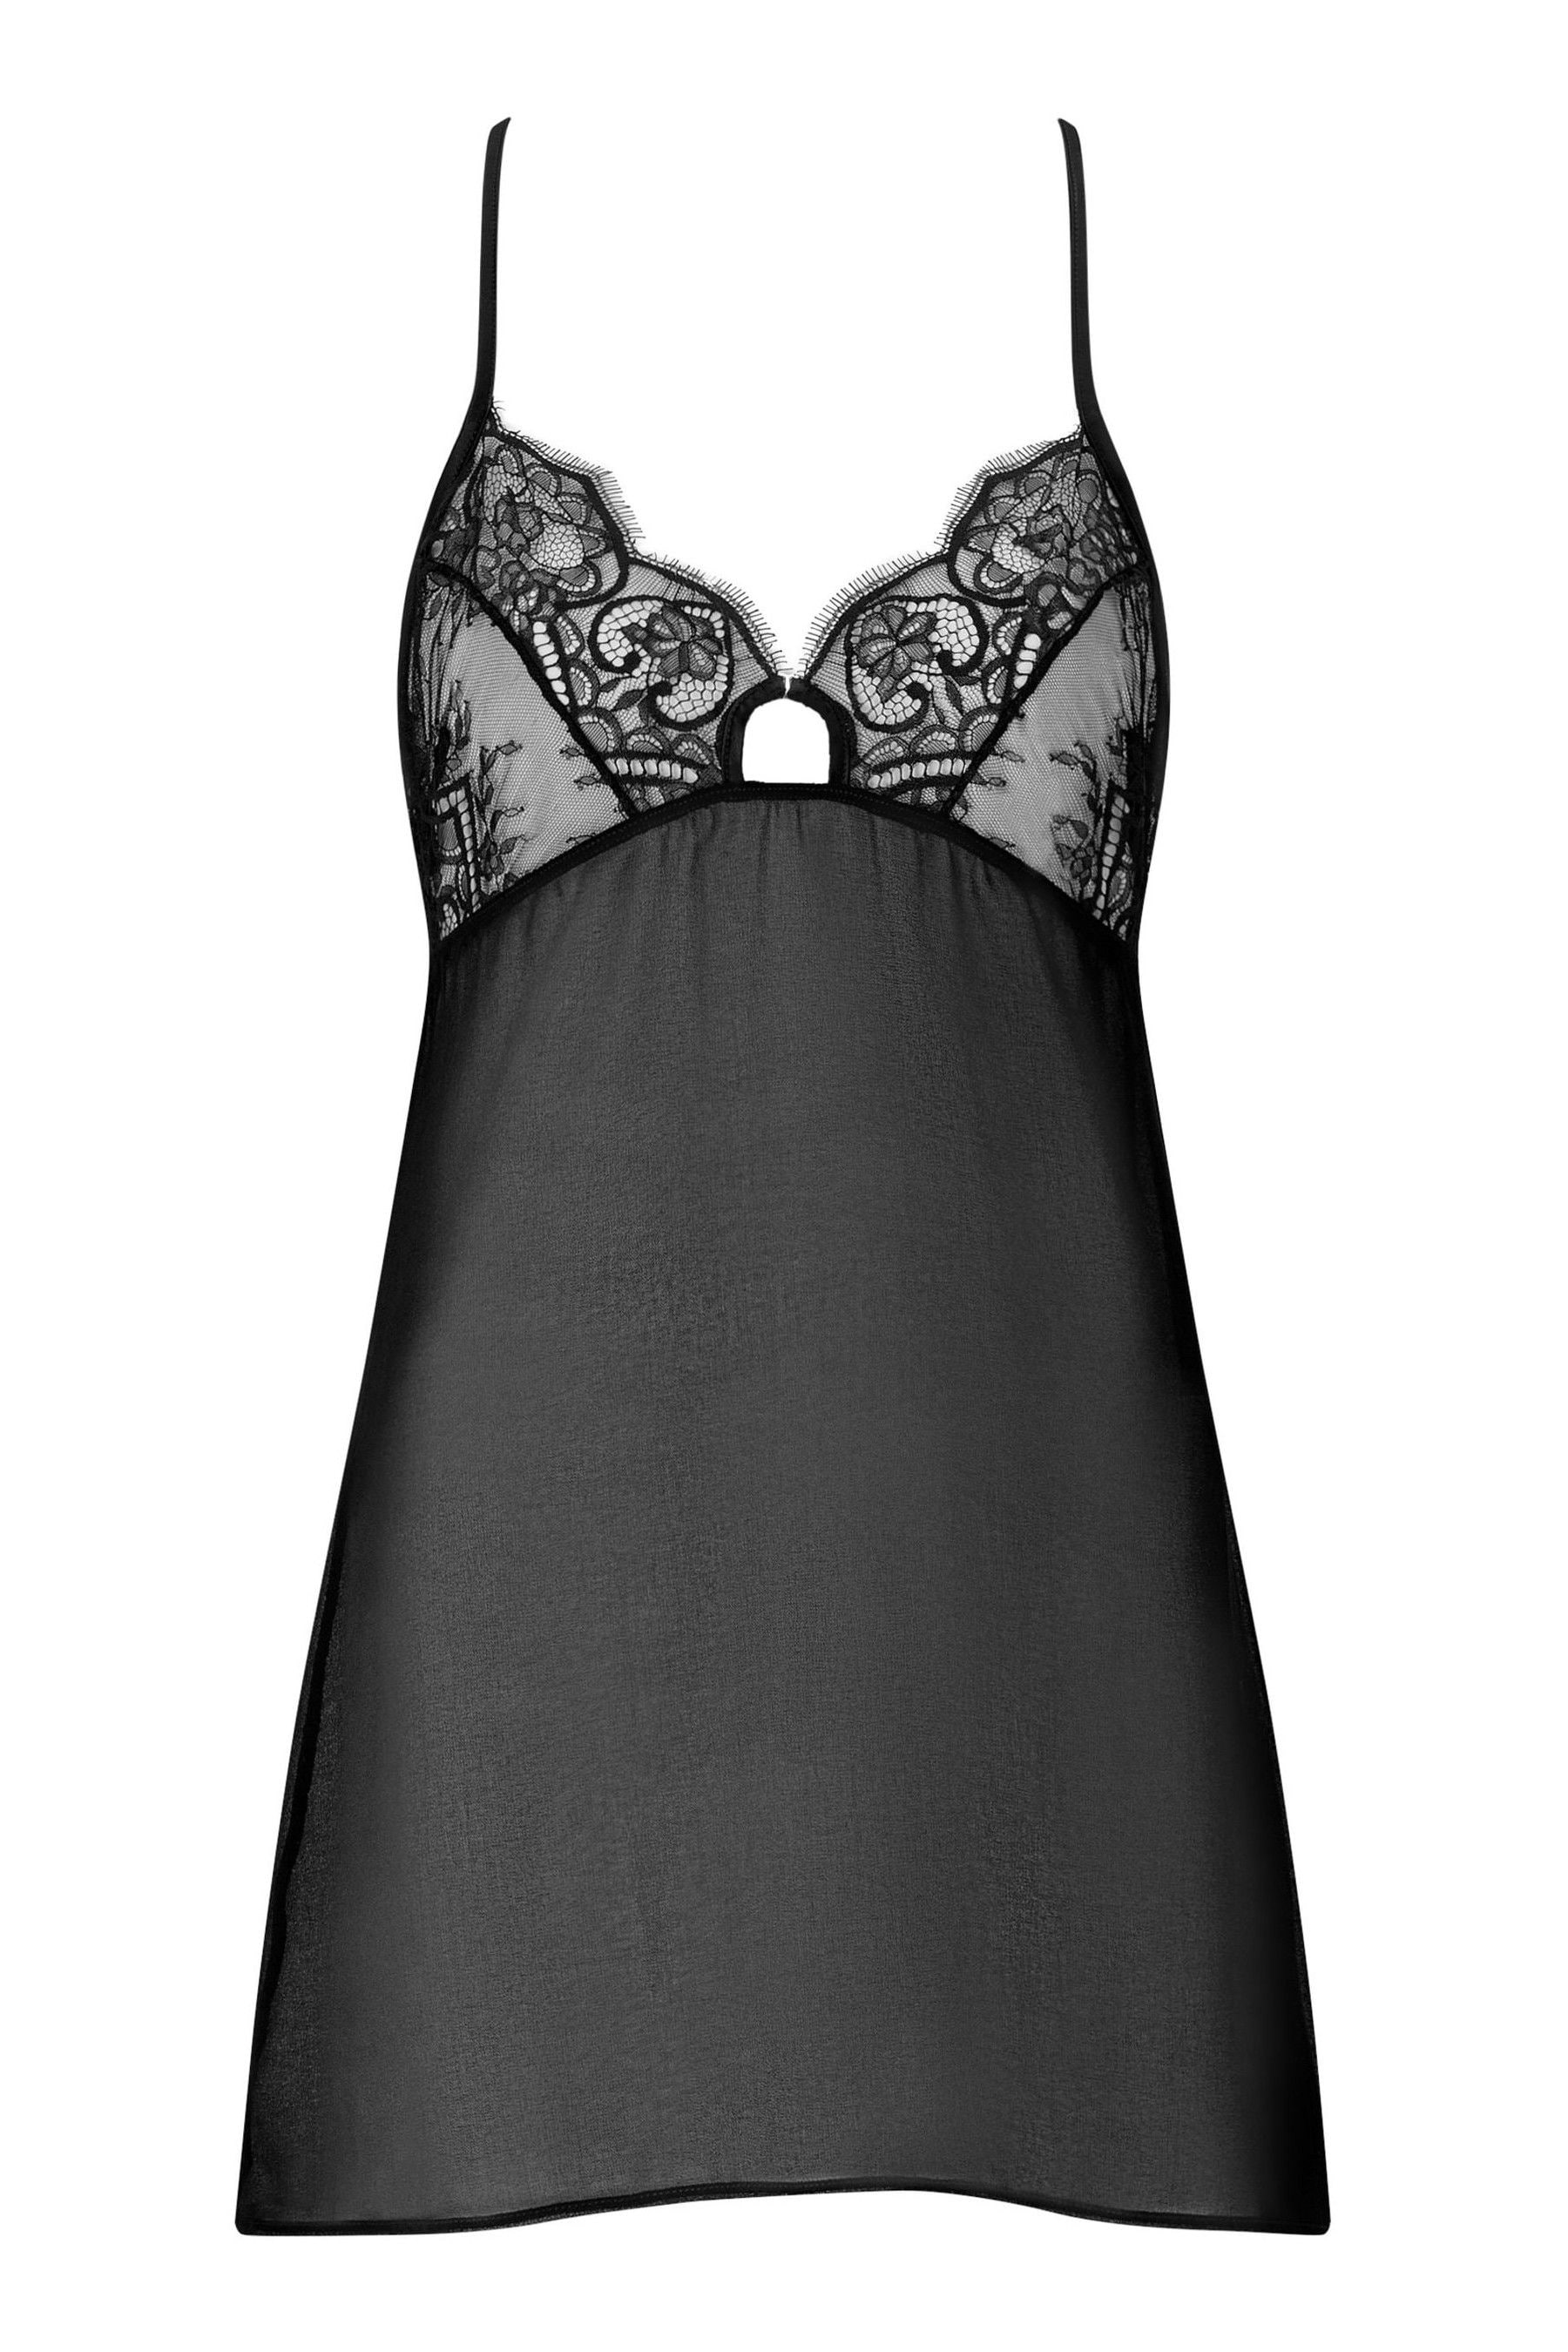 Buy Ann Summers Idyllic Lace Babydoll Black Chemise Nightie from the ...